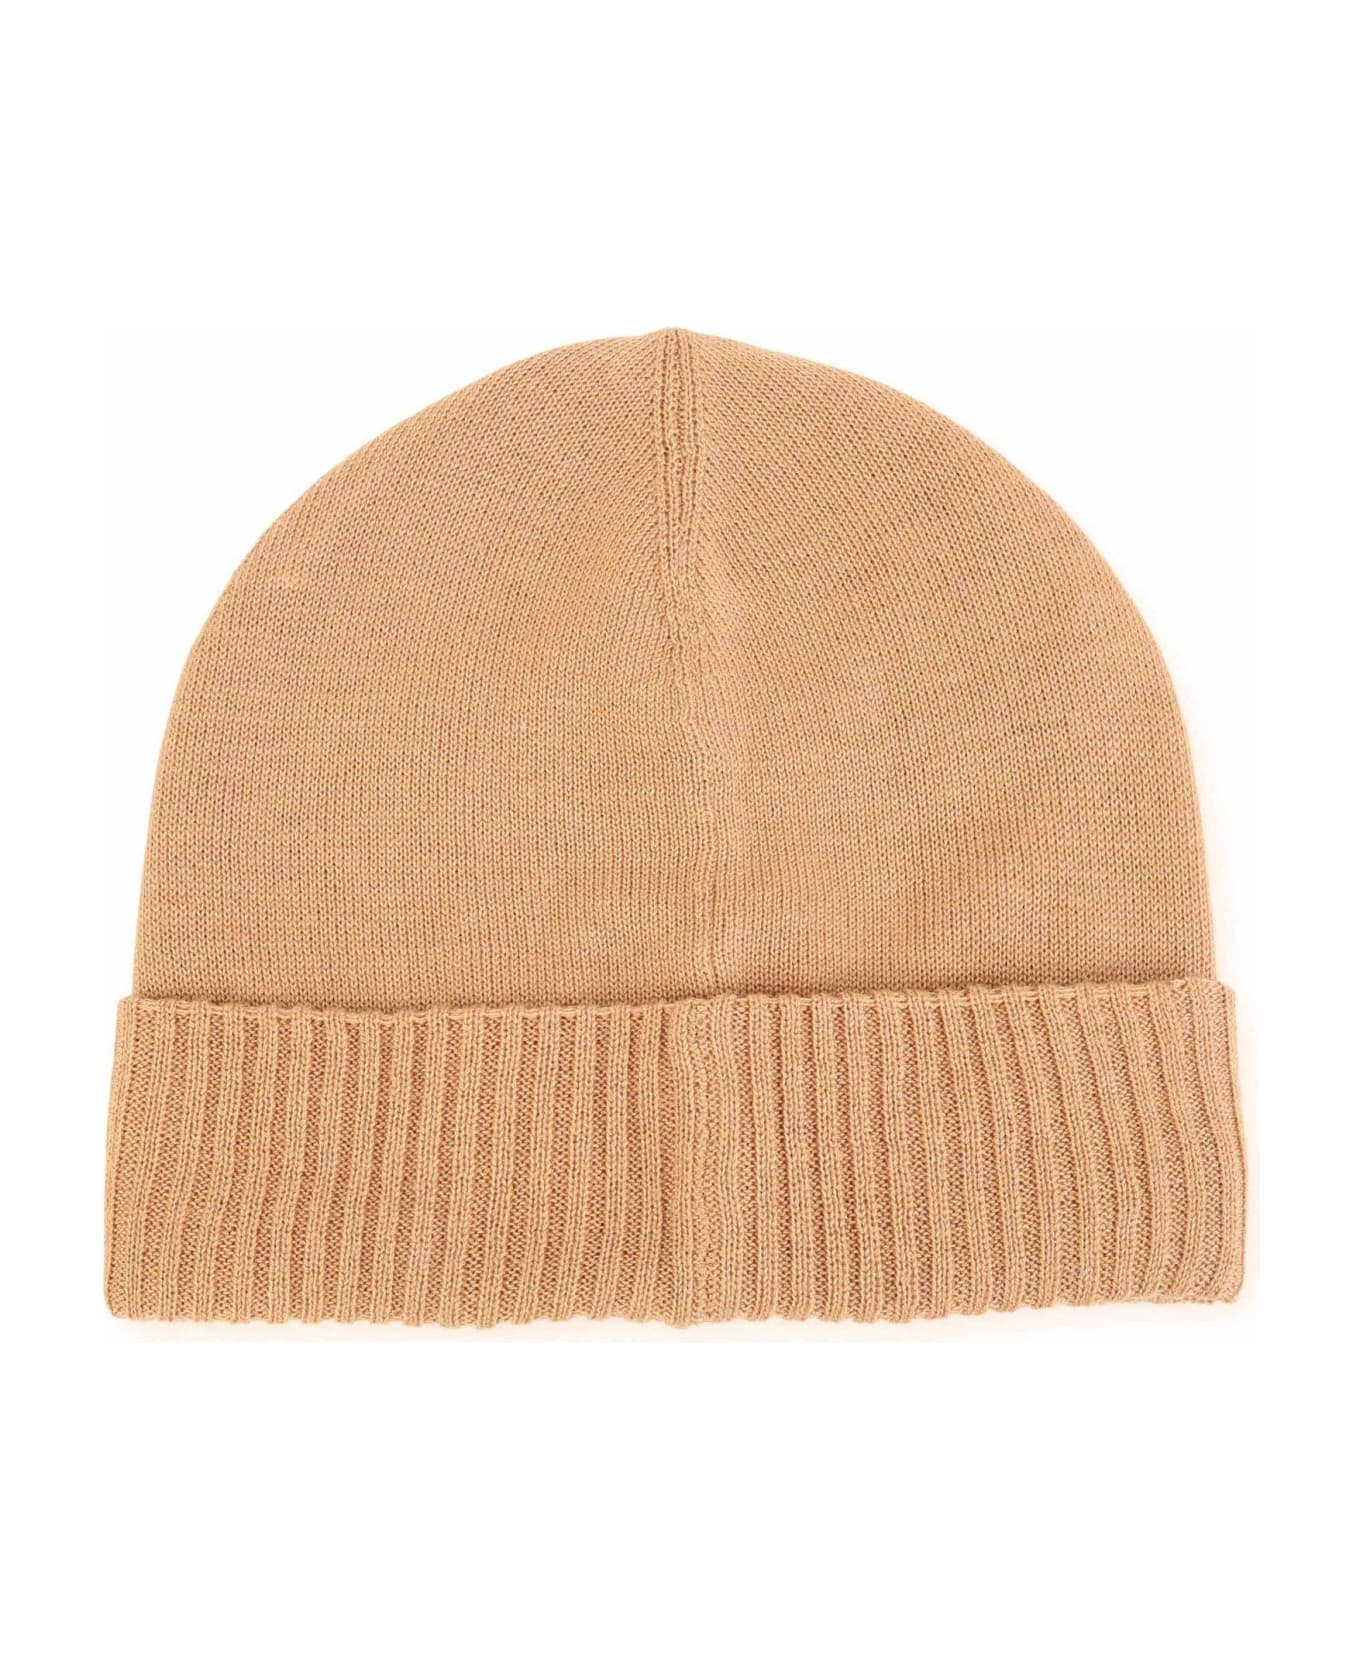 Hugo Boss Logo Patch Knitted Beanie - Beige アクセサリー＆ギフト